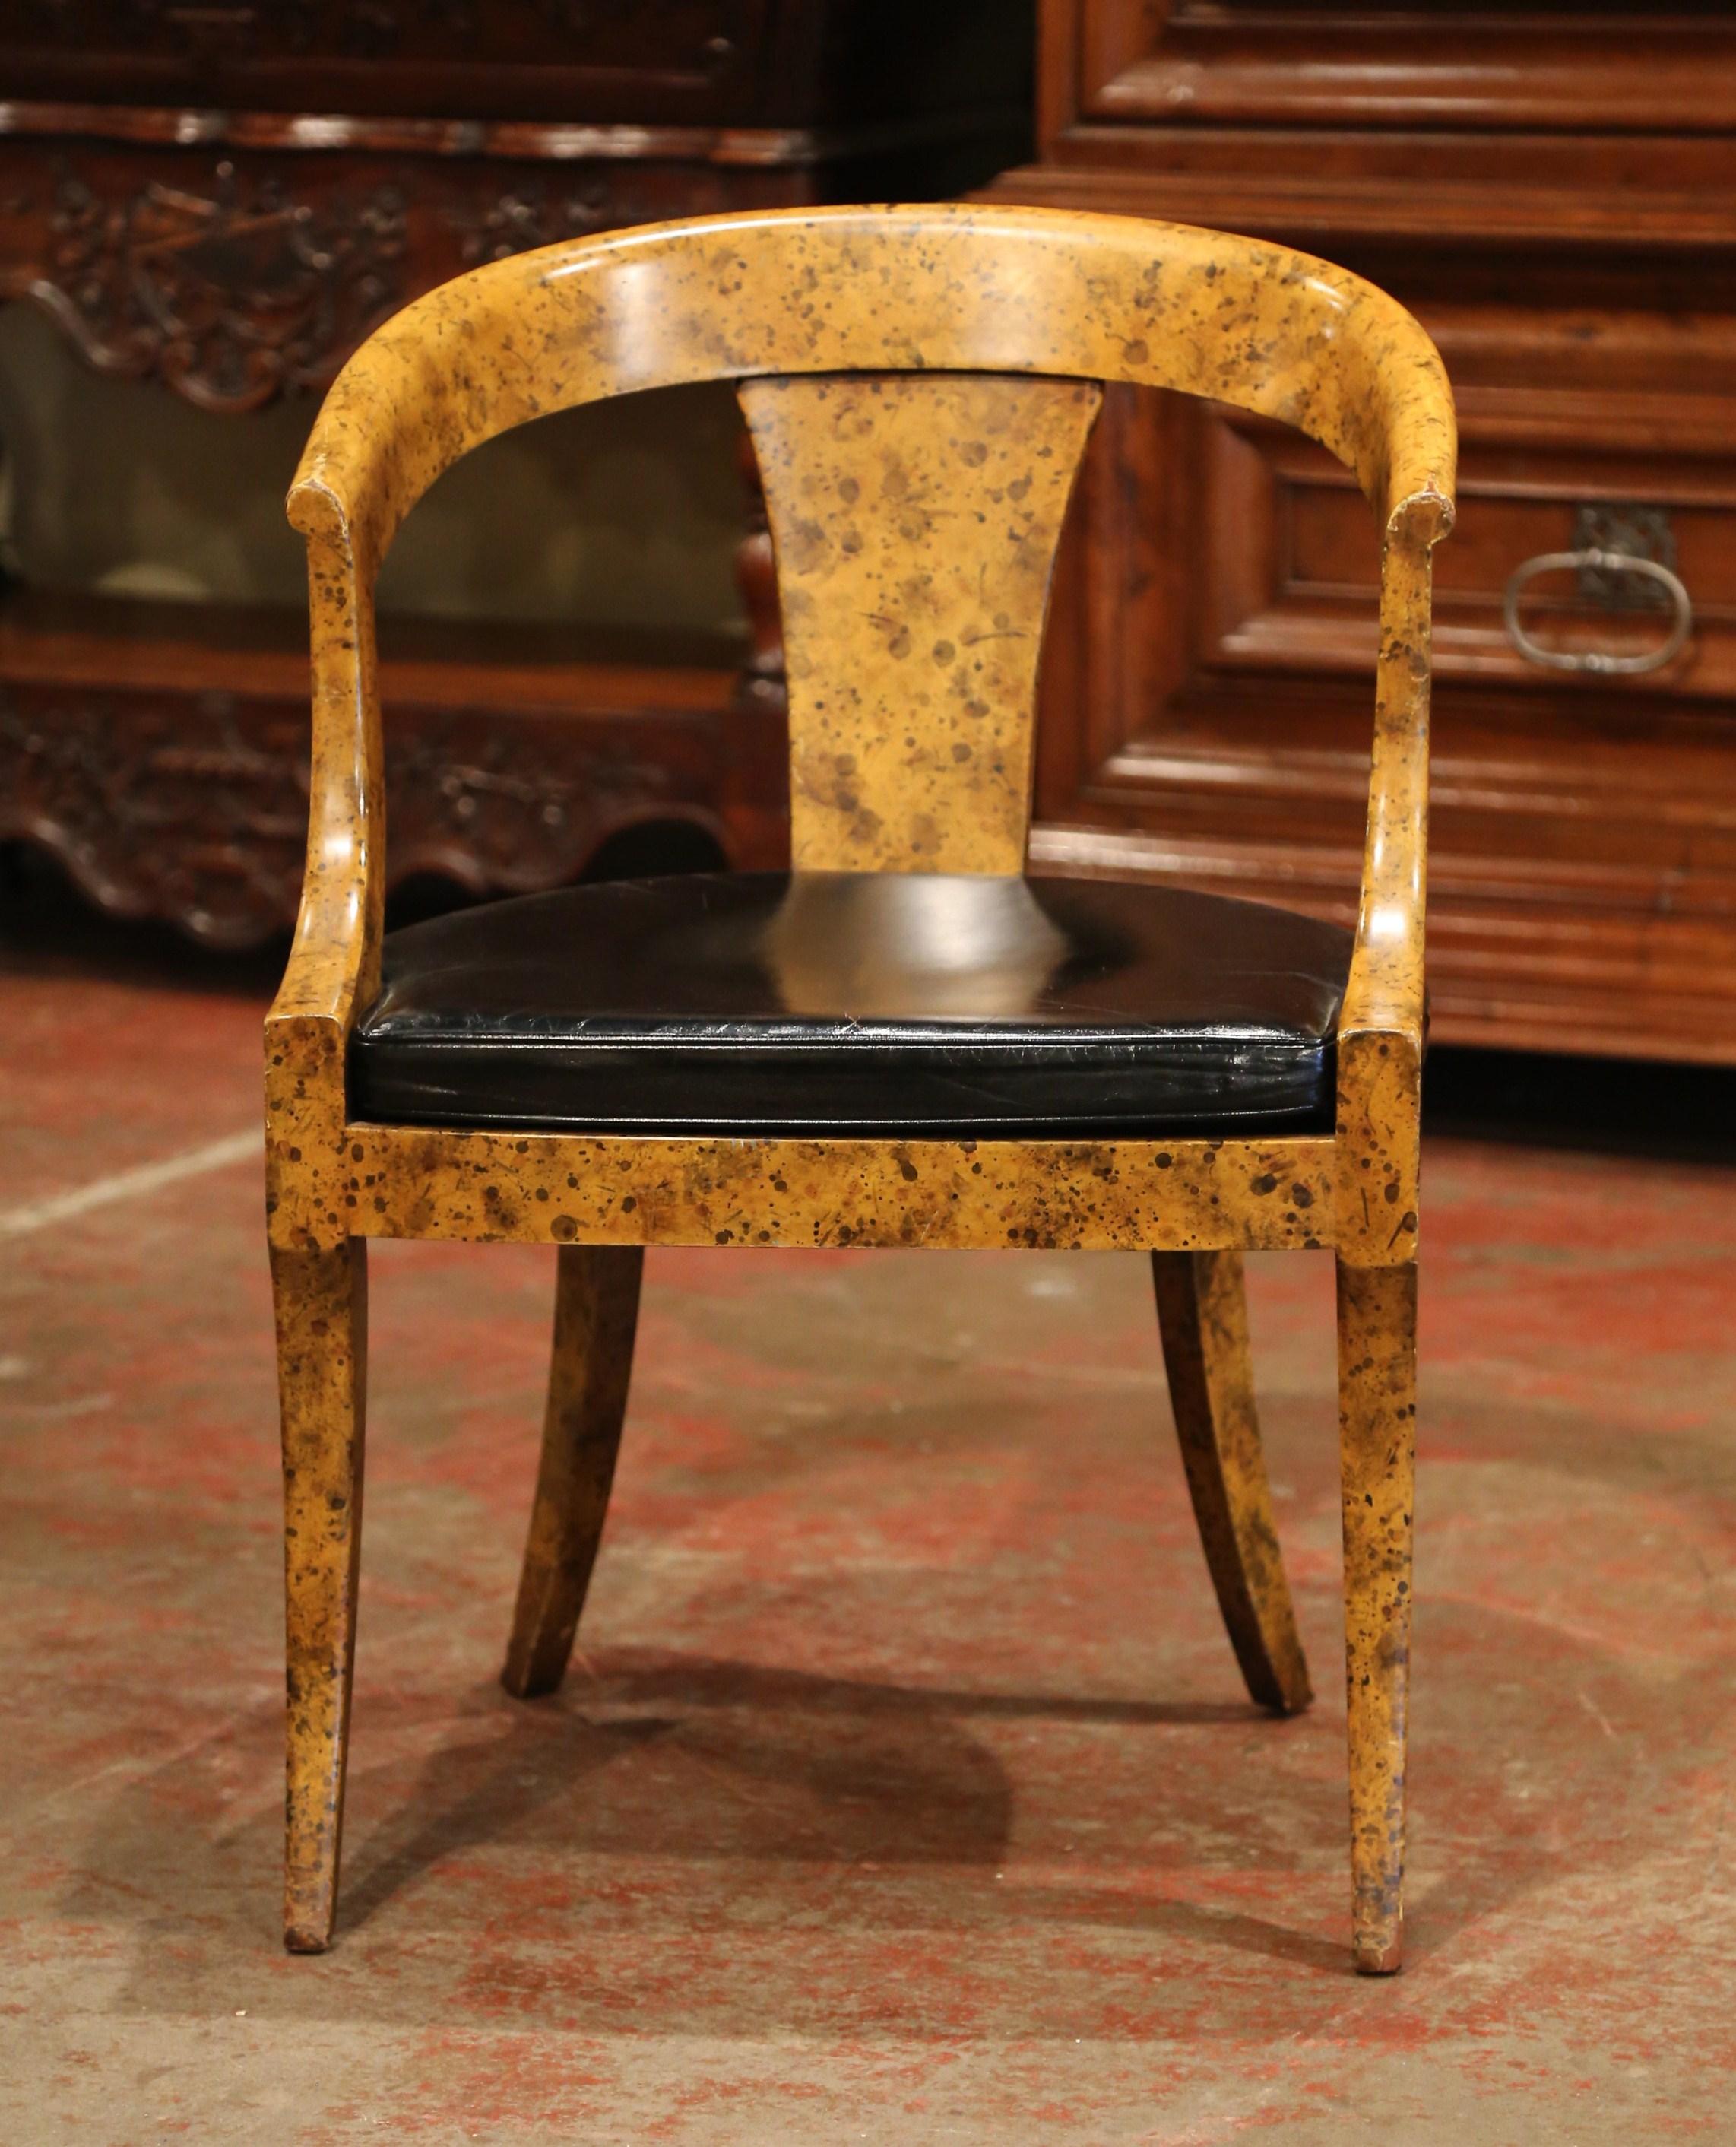 This mid-20th century Louis Philippe chair has a vintage shape and style that is highly compatible with current interior design trends. The sophisticated armchair would make an elegant yet subtle statement behind a man's desk. Crafted in France,